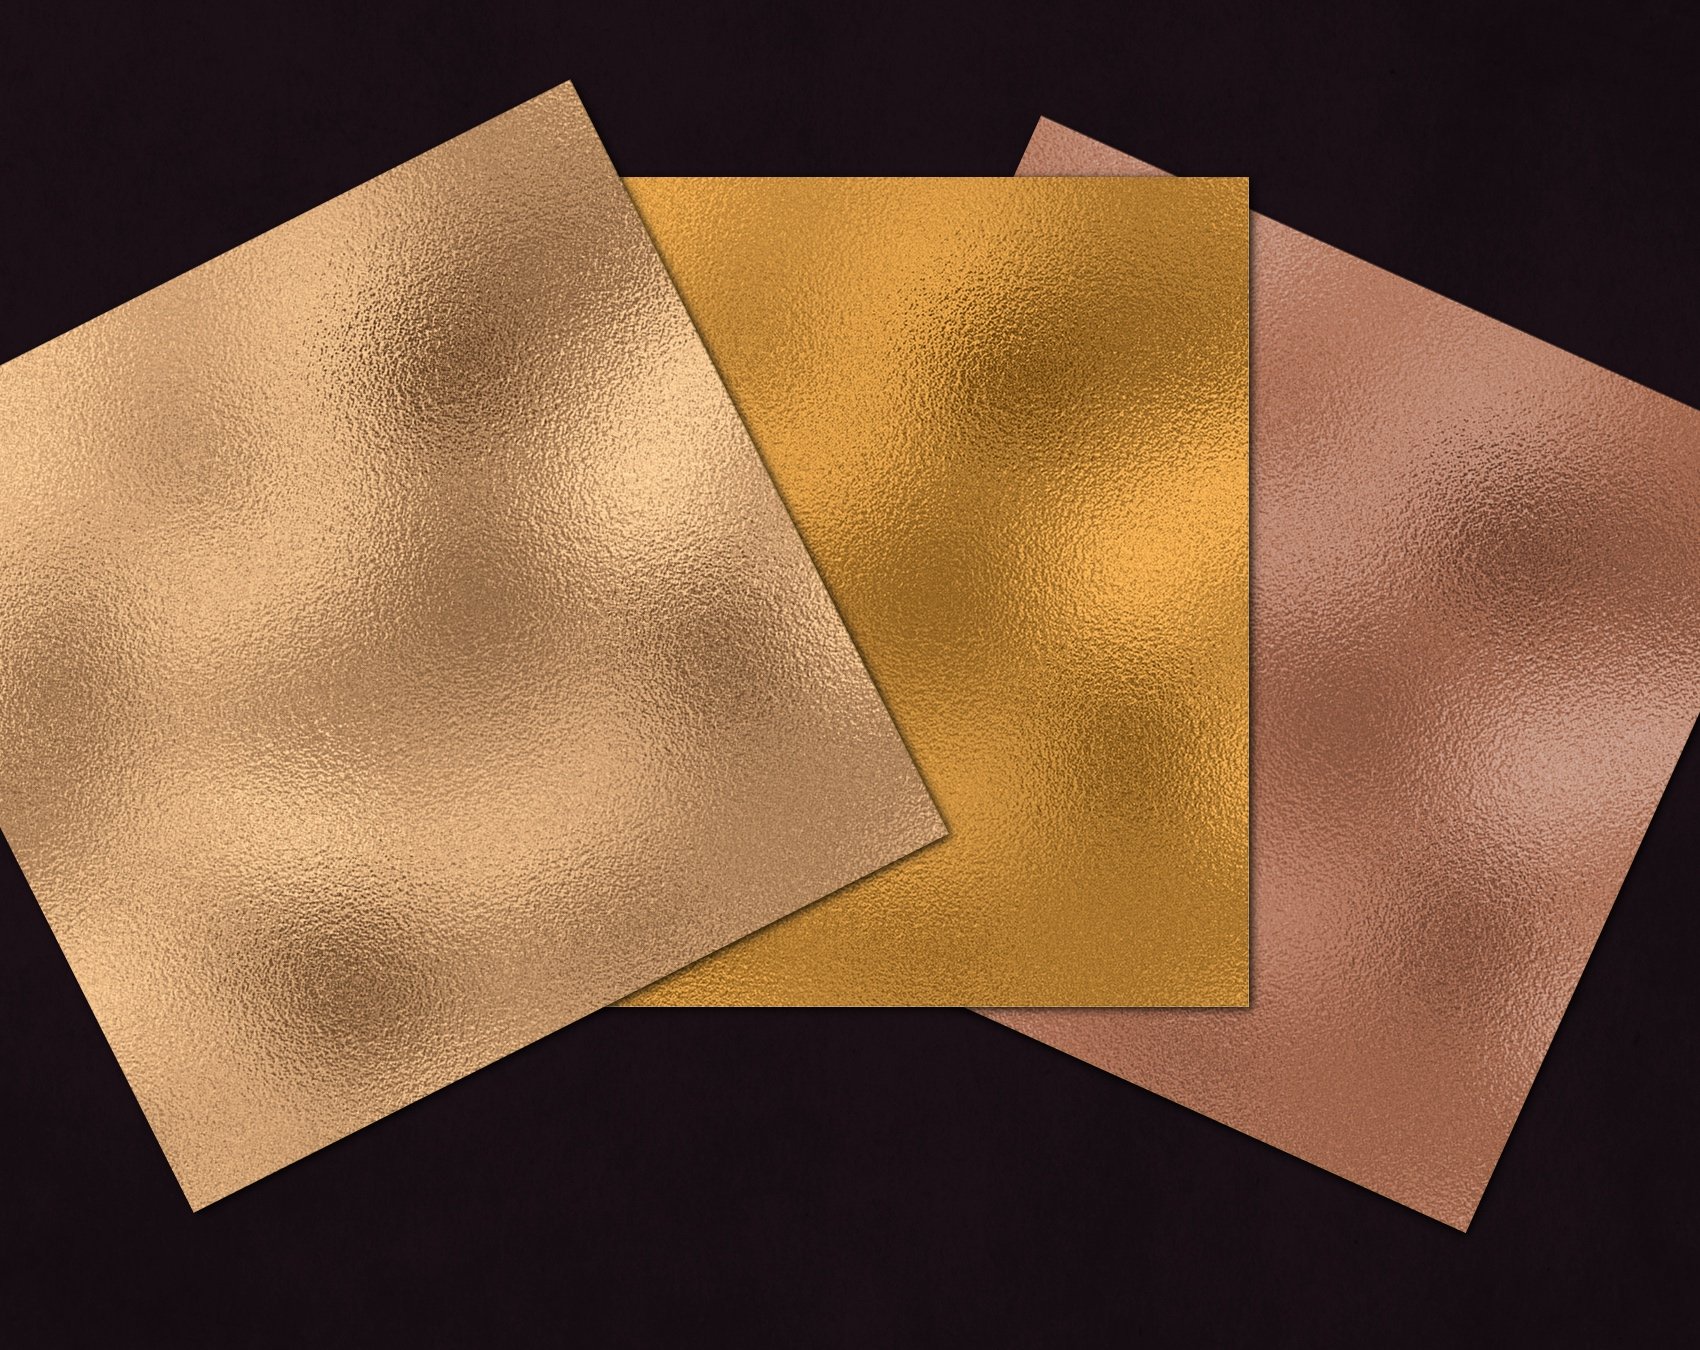 Collection of gold foil and metallic backgrounds.